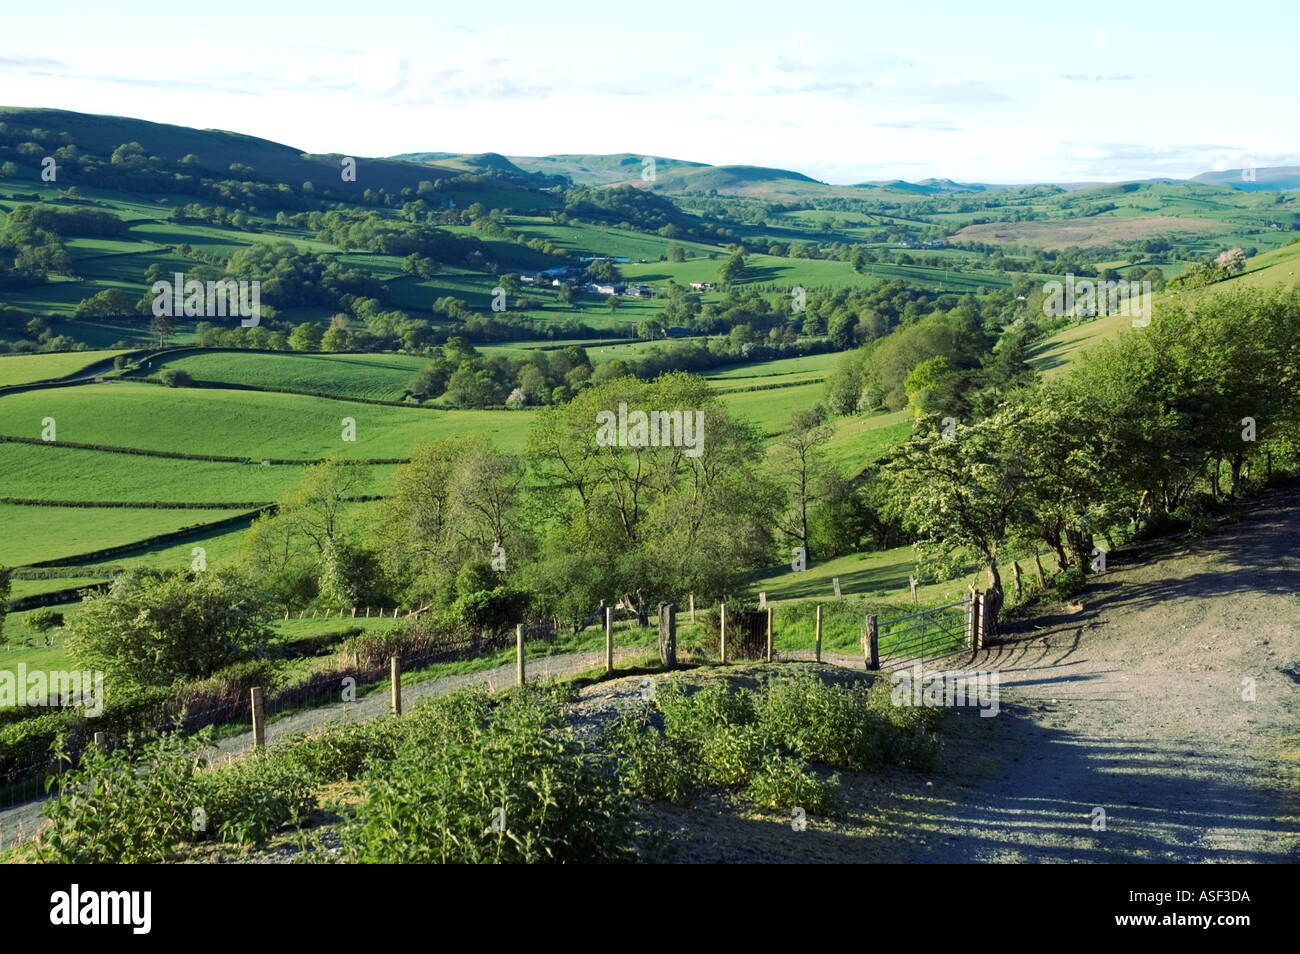 A landscape view of the countryside in Mid-Wales, Powys, Wales, UK. Stock Photo